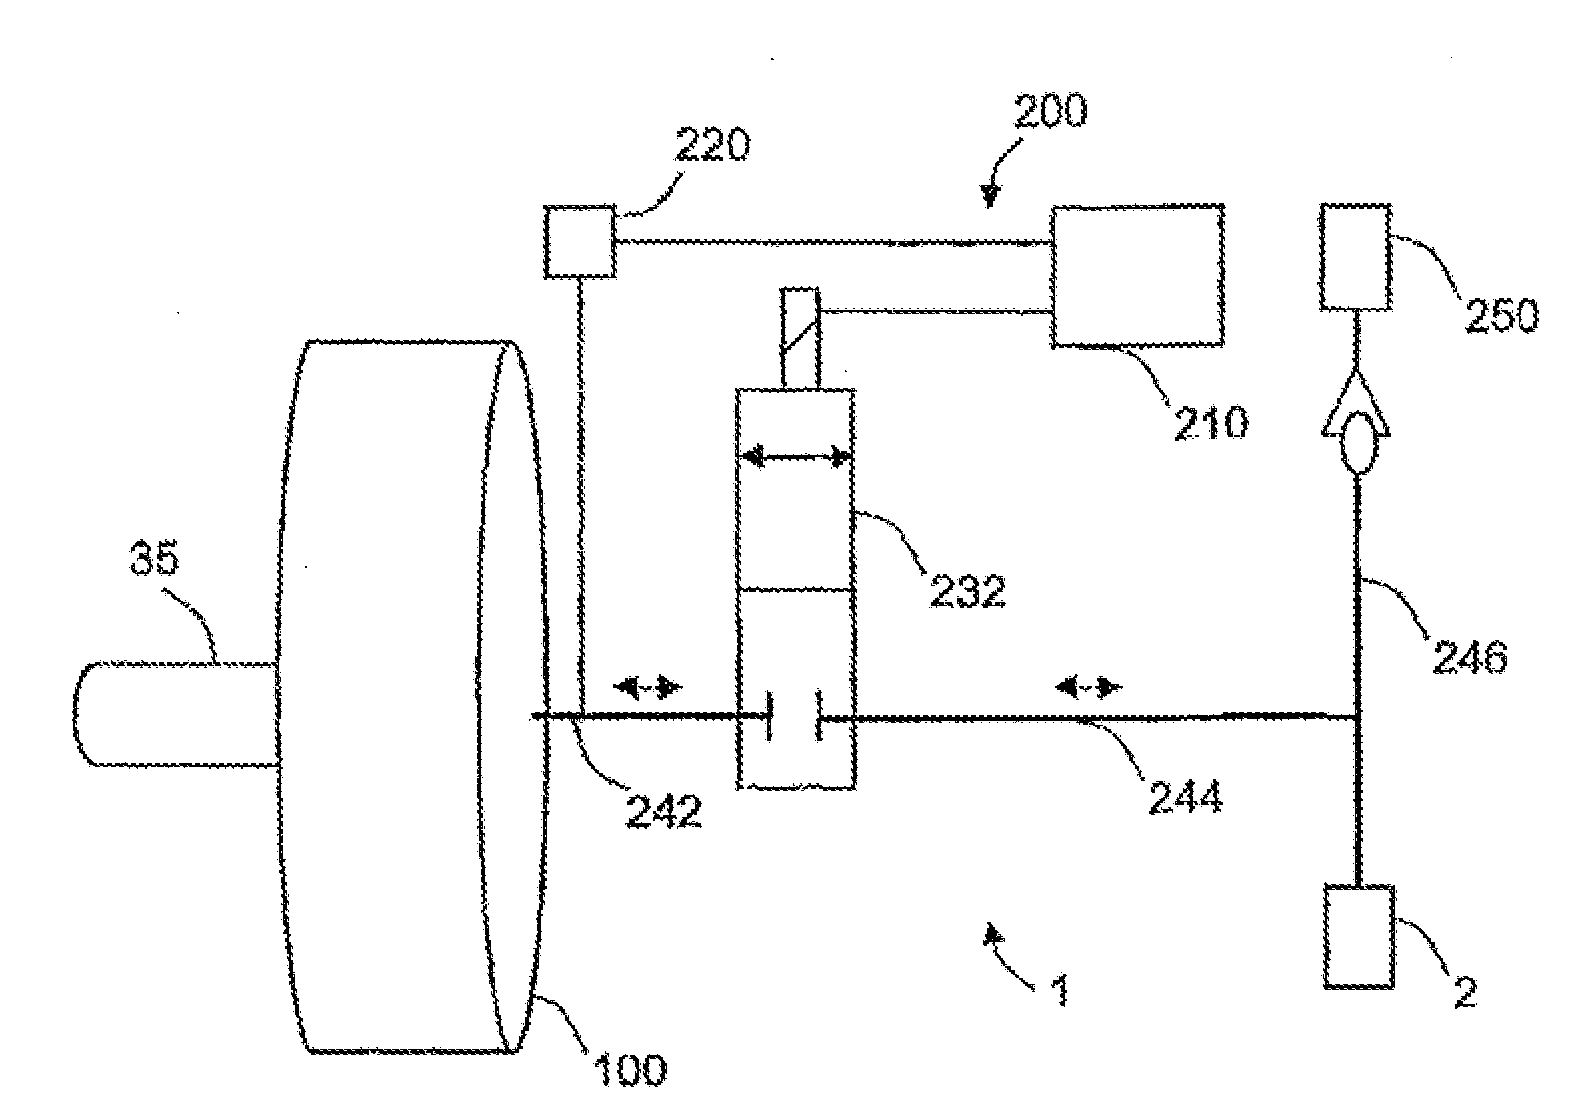 Air storage system for an air suspension system in a heavy vehicle